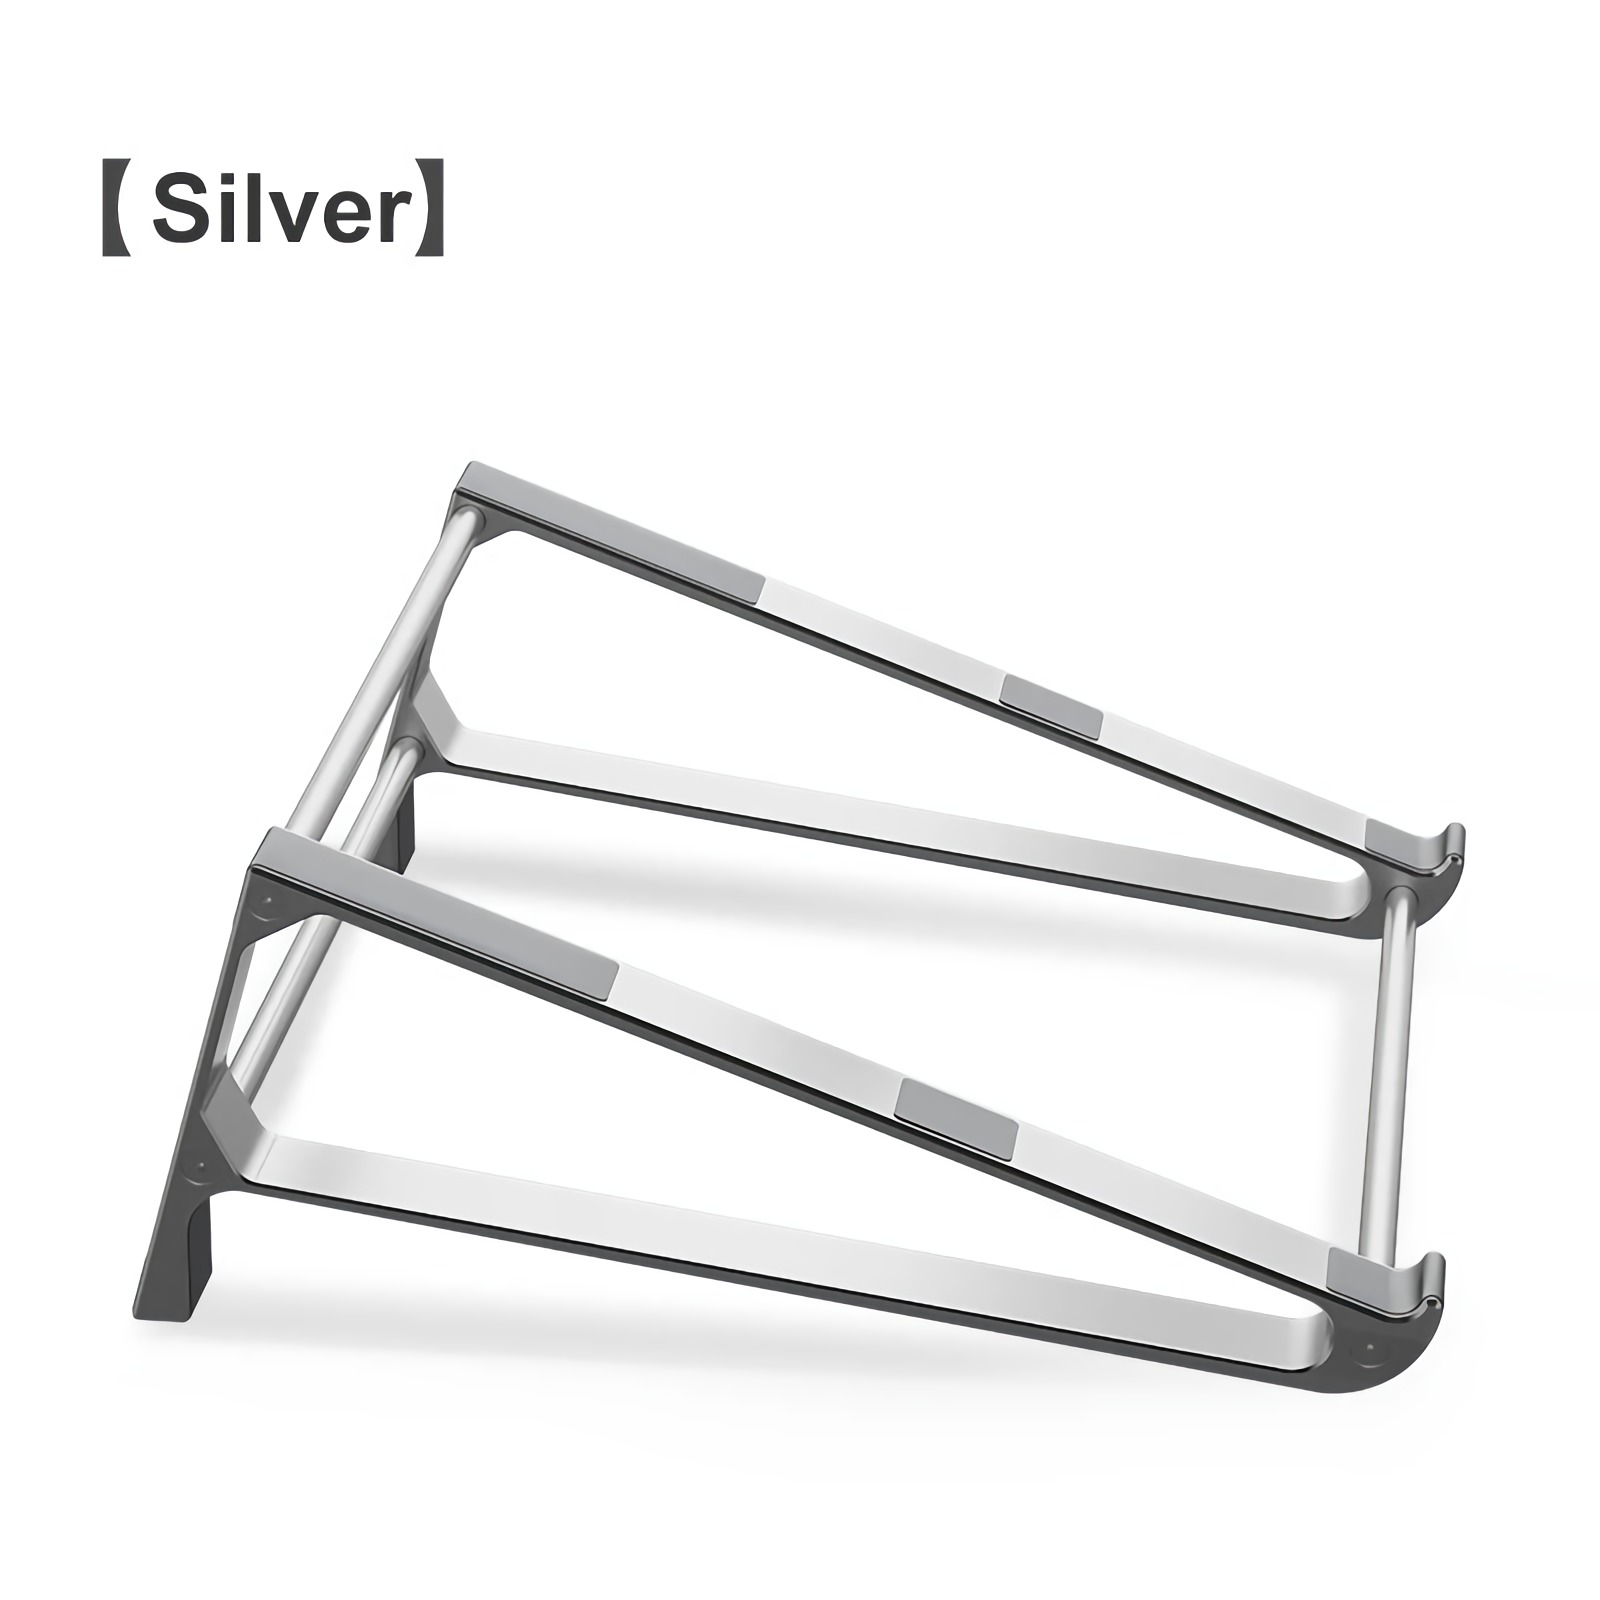 Aluminium-Alloy-2-in-1-Vertical-Stand-Laptop-Stand-Tablet-Holder-Desk-Mobile-Phone-Stand-For-17quot--1630797-2